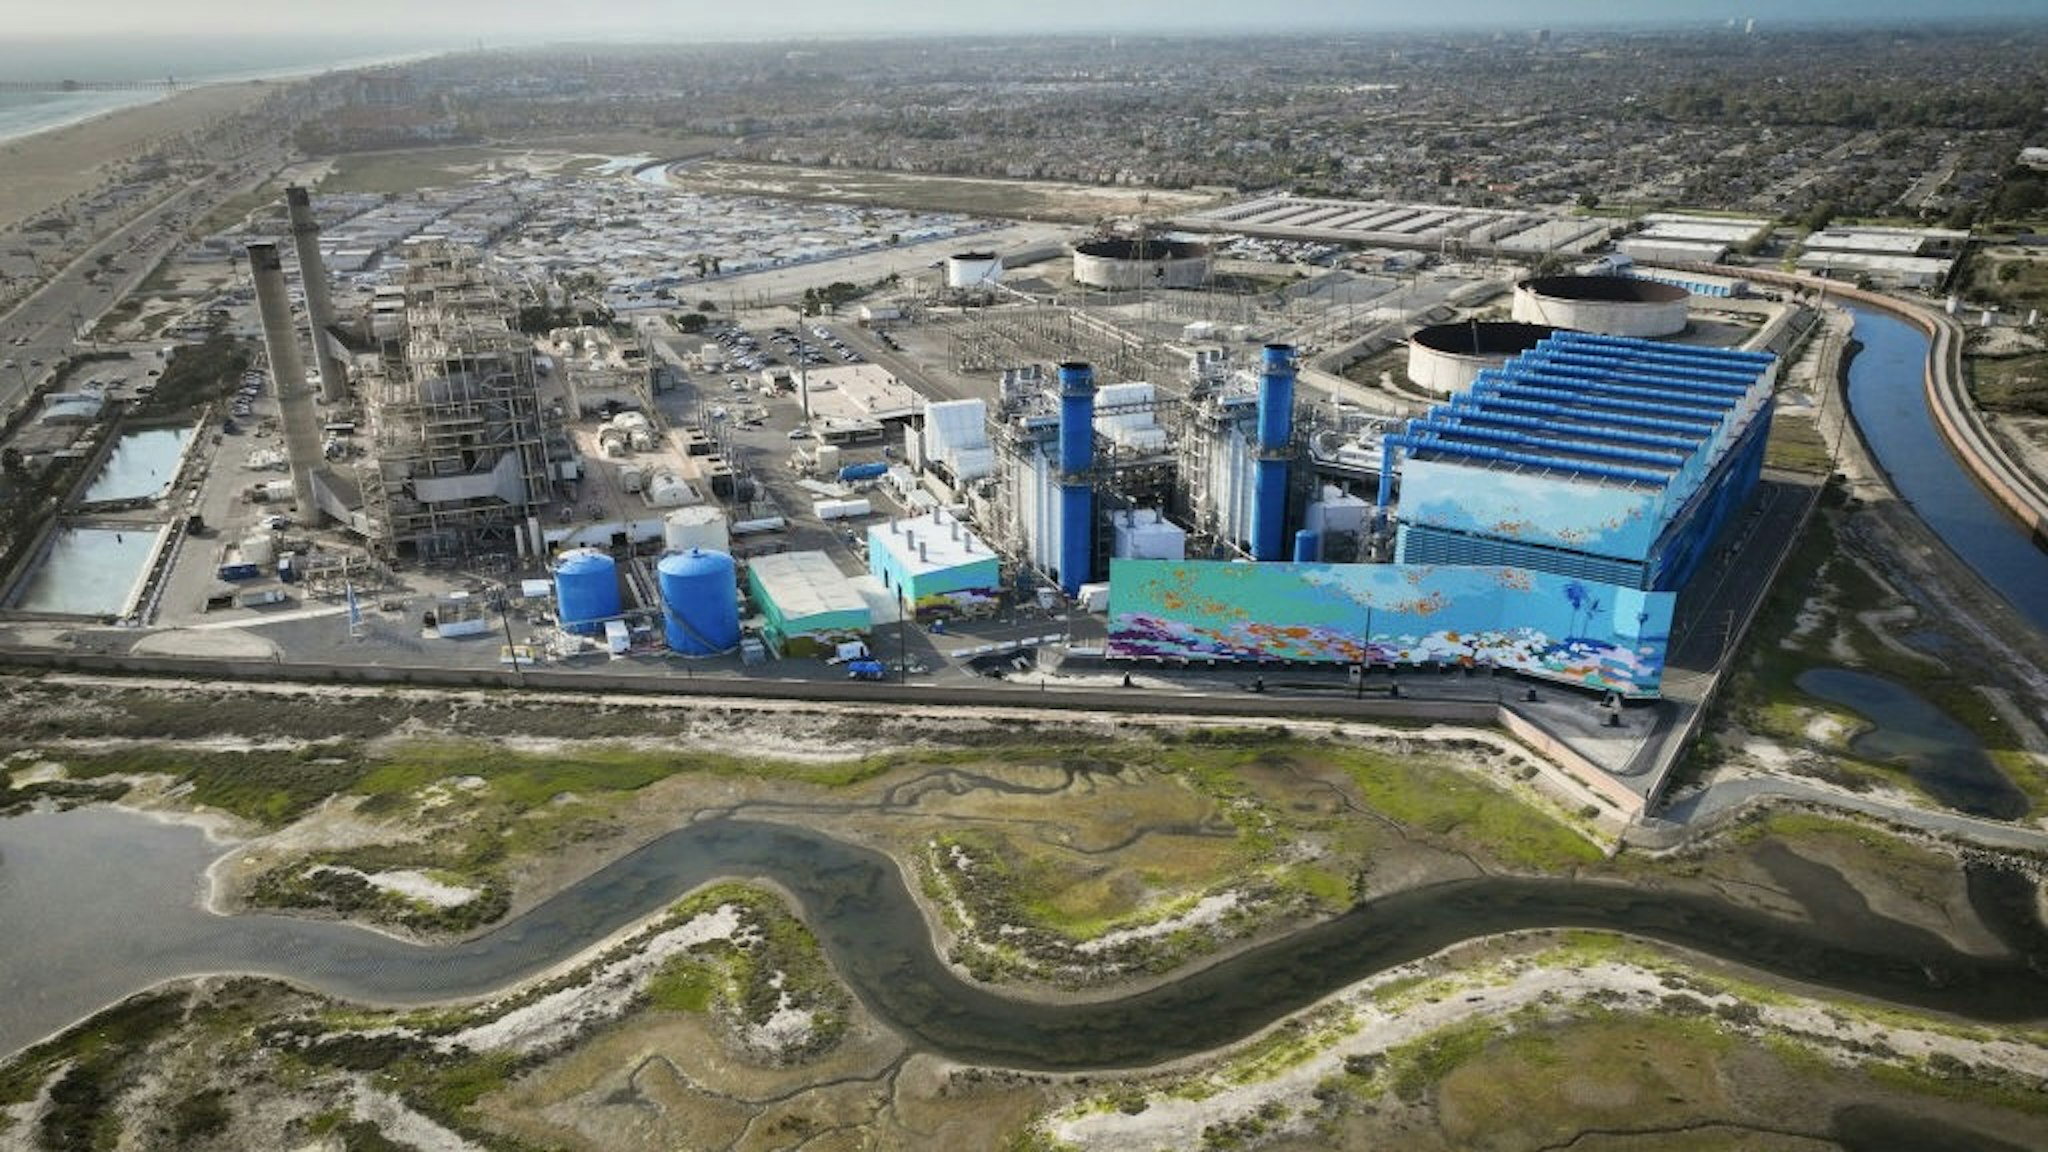 Proposed desalination plant in Huntington Beach Huntington Beach, CA - April 5: An aerial view of the Huntington Beach Wetlands and the Huntington Beach Energy Center, formerly AES Huntington Beach, a natural gas-fired power station that partially uses the power plants existing ocean cooling pipes to tap the Pacific and partially air-cooling, and is the proposed site of the Poseidon desalination plant. Photo taken Tuesday, April 5, 2022. The partially retired Huntington Beach Generating Station consists of four generating units but only unit 2 is still in commercial operation as a legacy unit and has an extension to operate through the end of 2023, issued by the California State Water Boards. Unit 2 runs to support peak demands and has a net output capacity of 225 megawatts. The 644 MW combined cycle gas turbine generator, shown in blue and white, began operation on June 25, 2020. Environmental groups have fought Poseidon, arguing that it is privatizing a public resource, has failed to adapt an old proposal to new state ocean protections from killing sea life and that the company is trying to fill a need that doesnt exist, uses too much natural gas energy. Environmental justice activists say water rates could be raised as much as $6 per month. Supporters say ocean desalination as an inexhaustible, local supply for a region that imports much of its water from increasingly unreliable, distant sources. Another stumbling block for Poseidon is state requirements to mitigate the projects harm to the marine environment. Poseidon would draw 106 million gallons a day of seawater through the huge offshore intake pipe, which would be screened, and use reverse osmosis membranes to rid the seawater of salt and impurities. That process would produce 56 million gallons a day of brine concentrate roughly twice as salty as the ocean which would be dumped back into the Pacific via a 1,500-foot discharge pipe equipped with outfall diffusers to promote mixing and dilution. The intake and discharge operations will take a toll on plankton, which plays a crucial role in the marine food chain, killing an estimated 300,000 microscopic organisms a day. (Allen J. Schaben / Los Angeles Times via Getty Images) Allen J. Schaben / Contributor